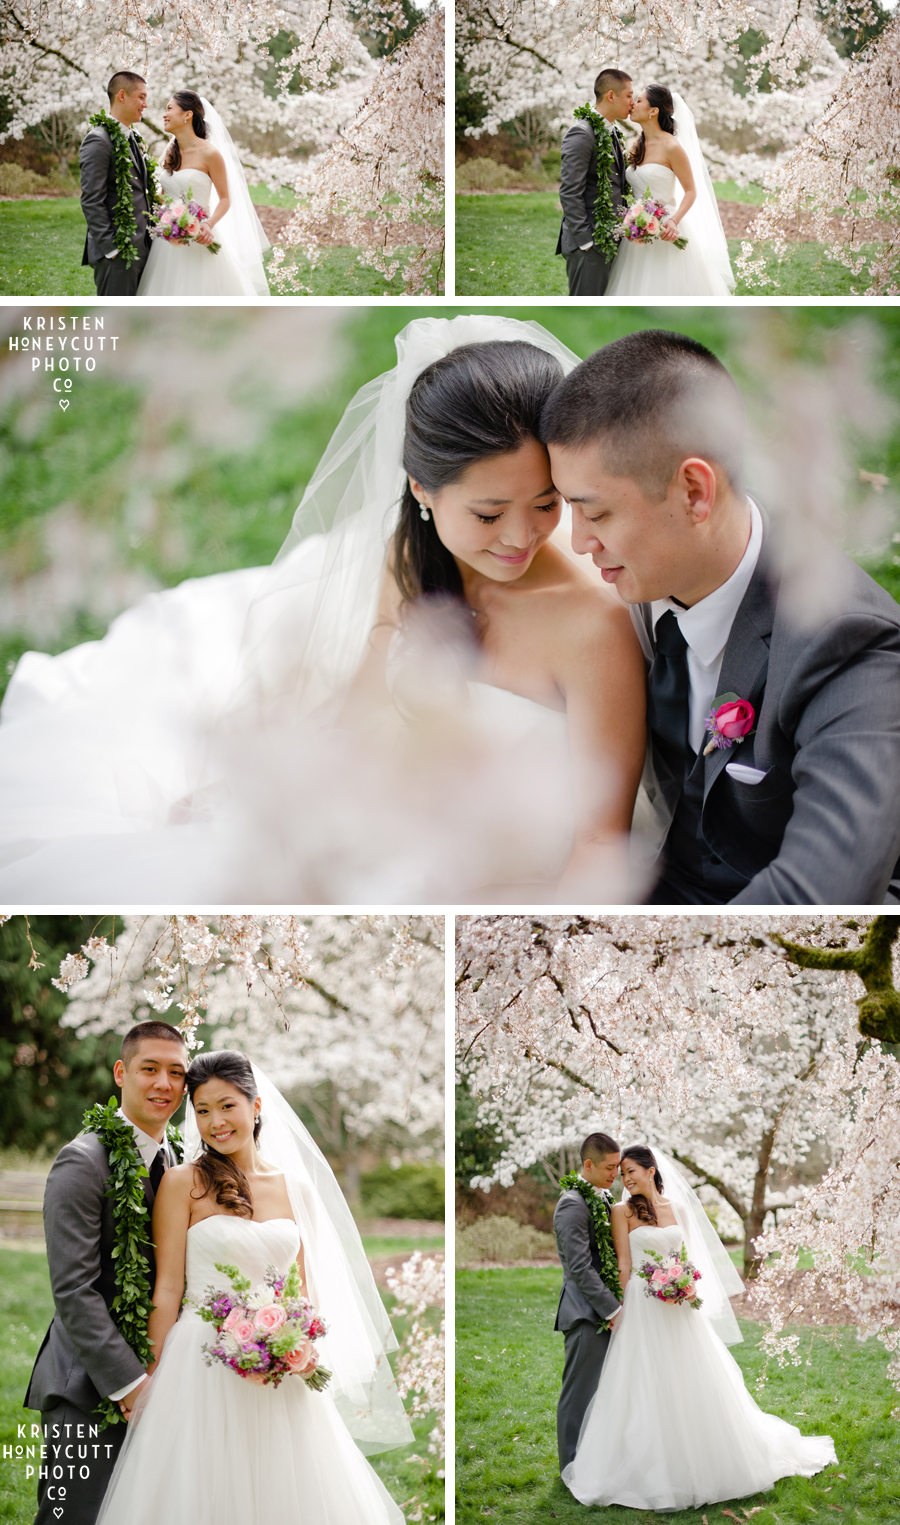 Bride and groom with gorgeous cherry blossoms in Seattle's Arboretum in Spring.